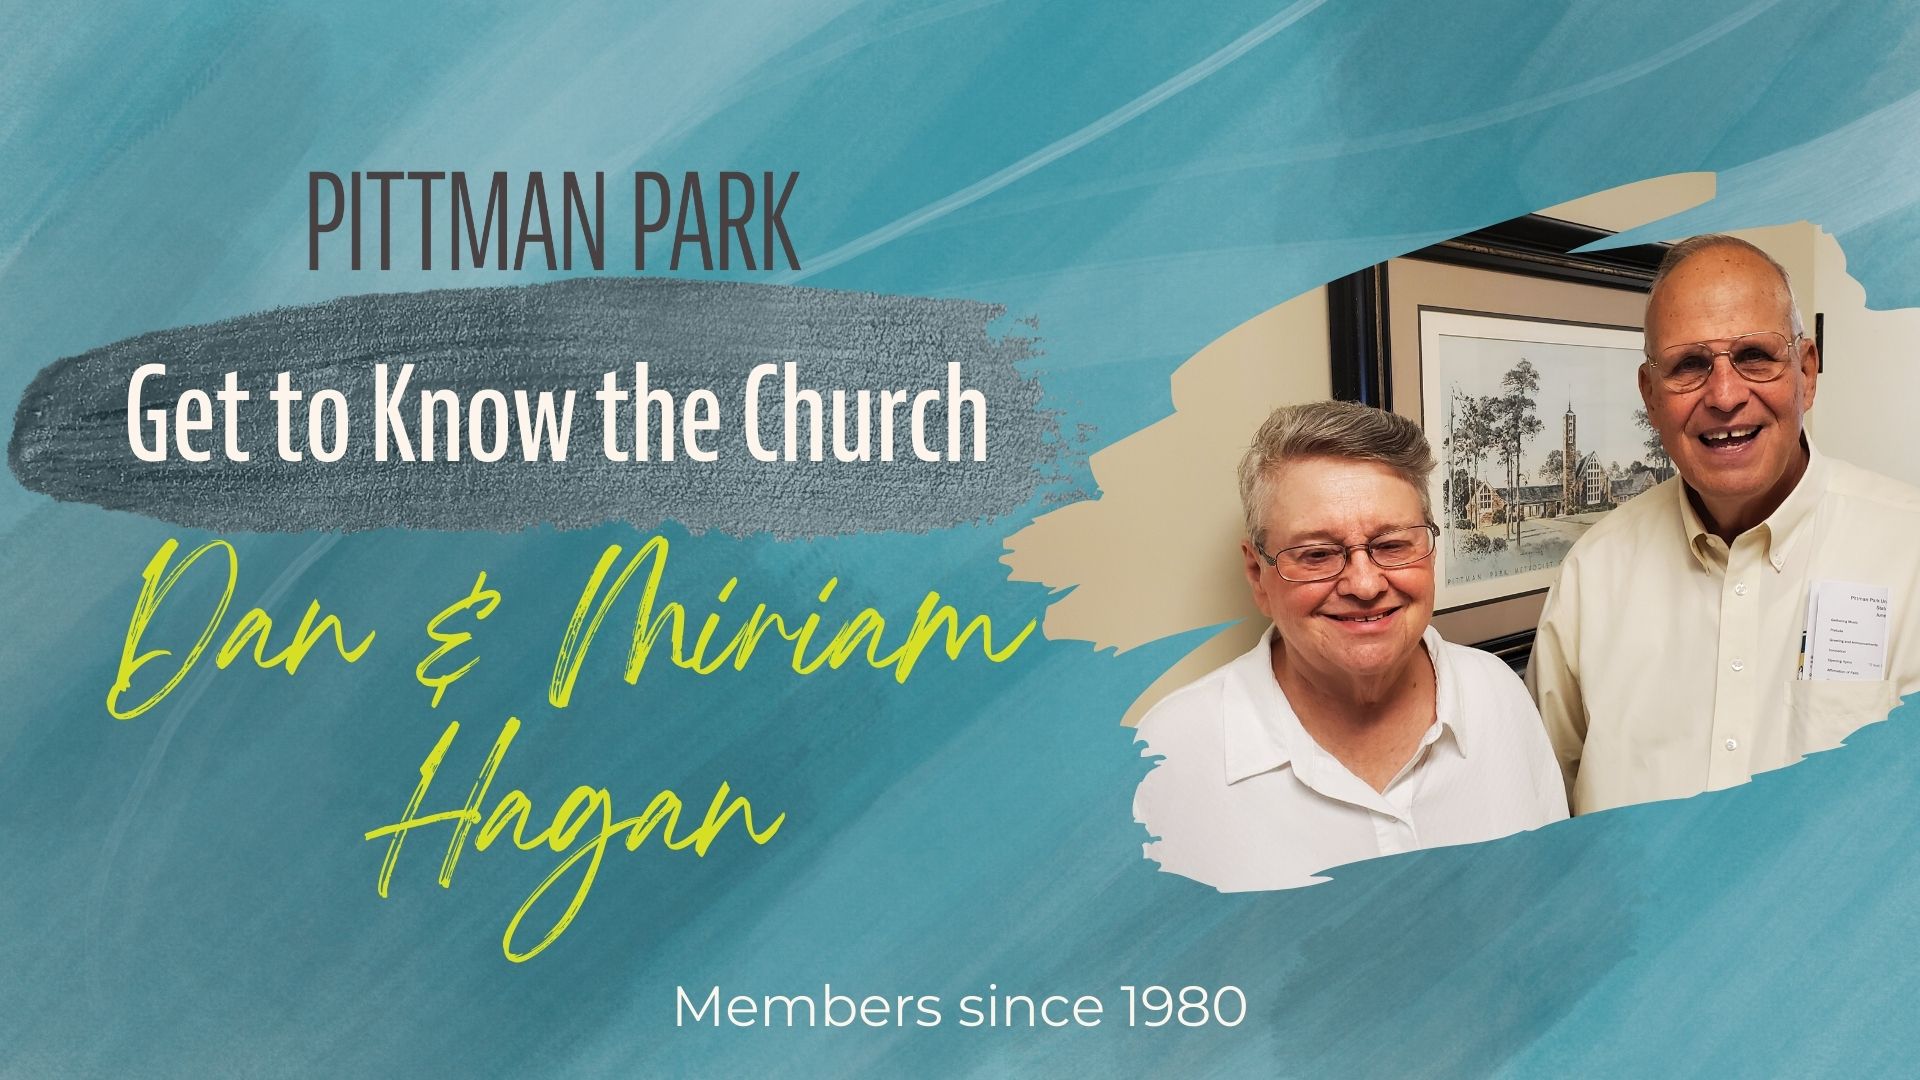 GET TO KNOW THE CHURCH: Dan and Miriam Hagan